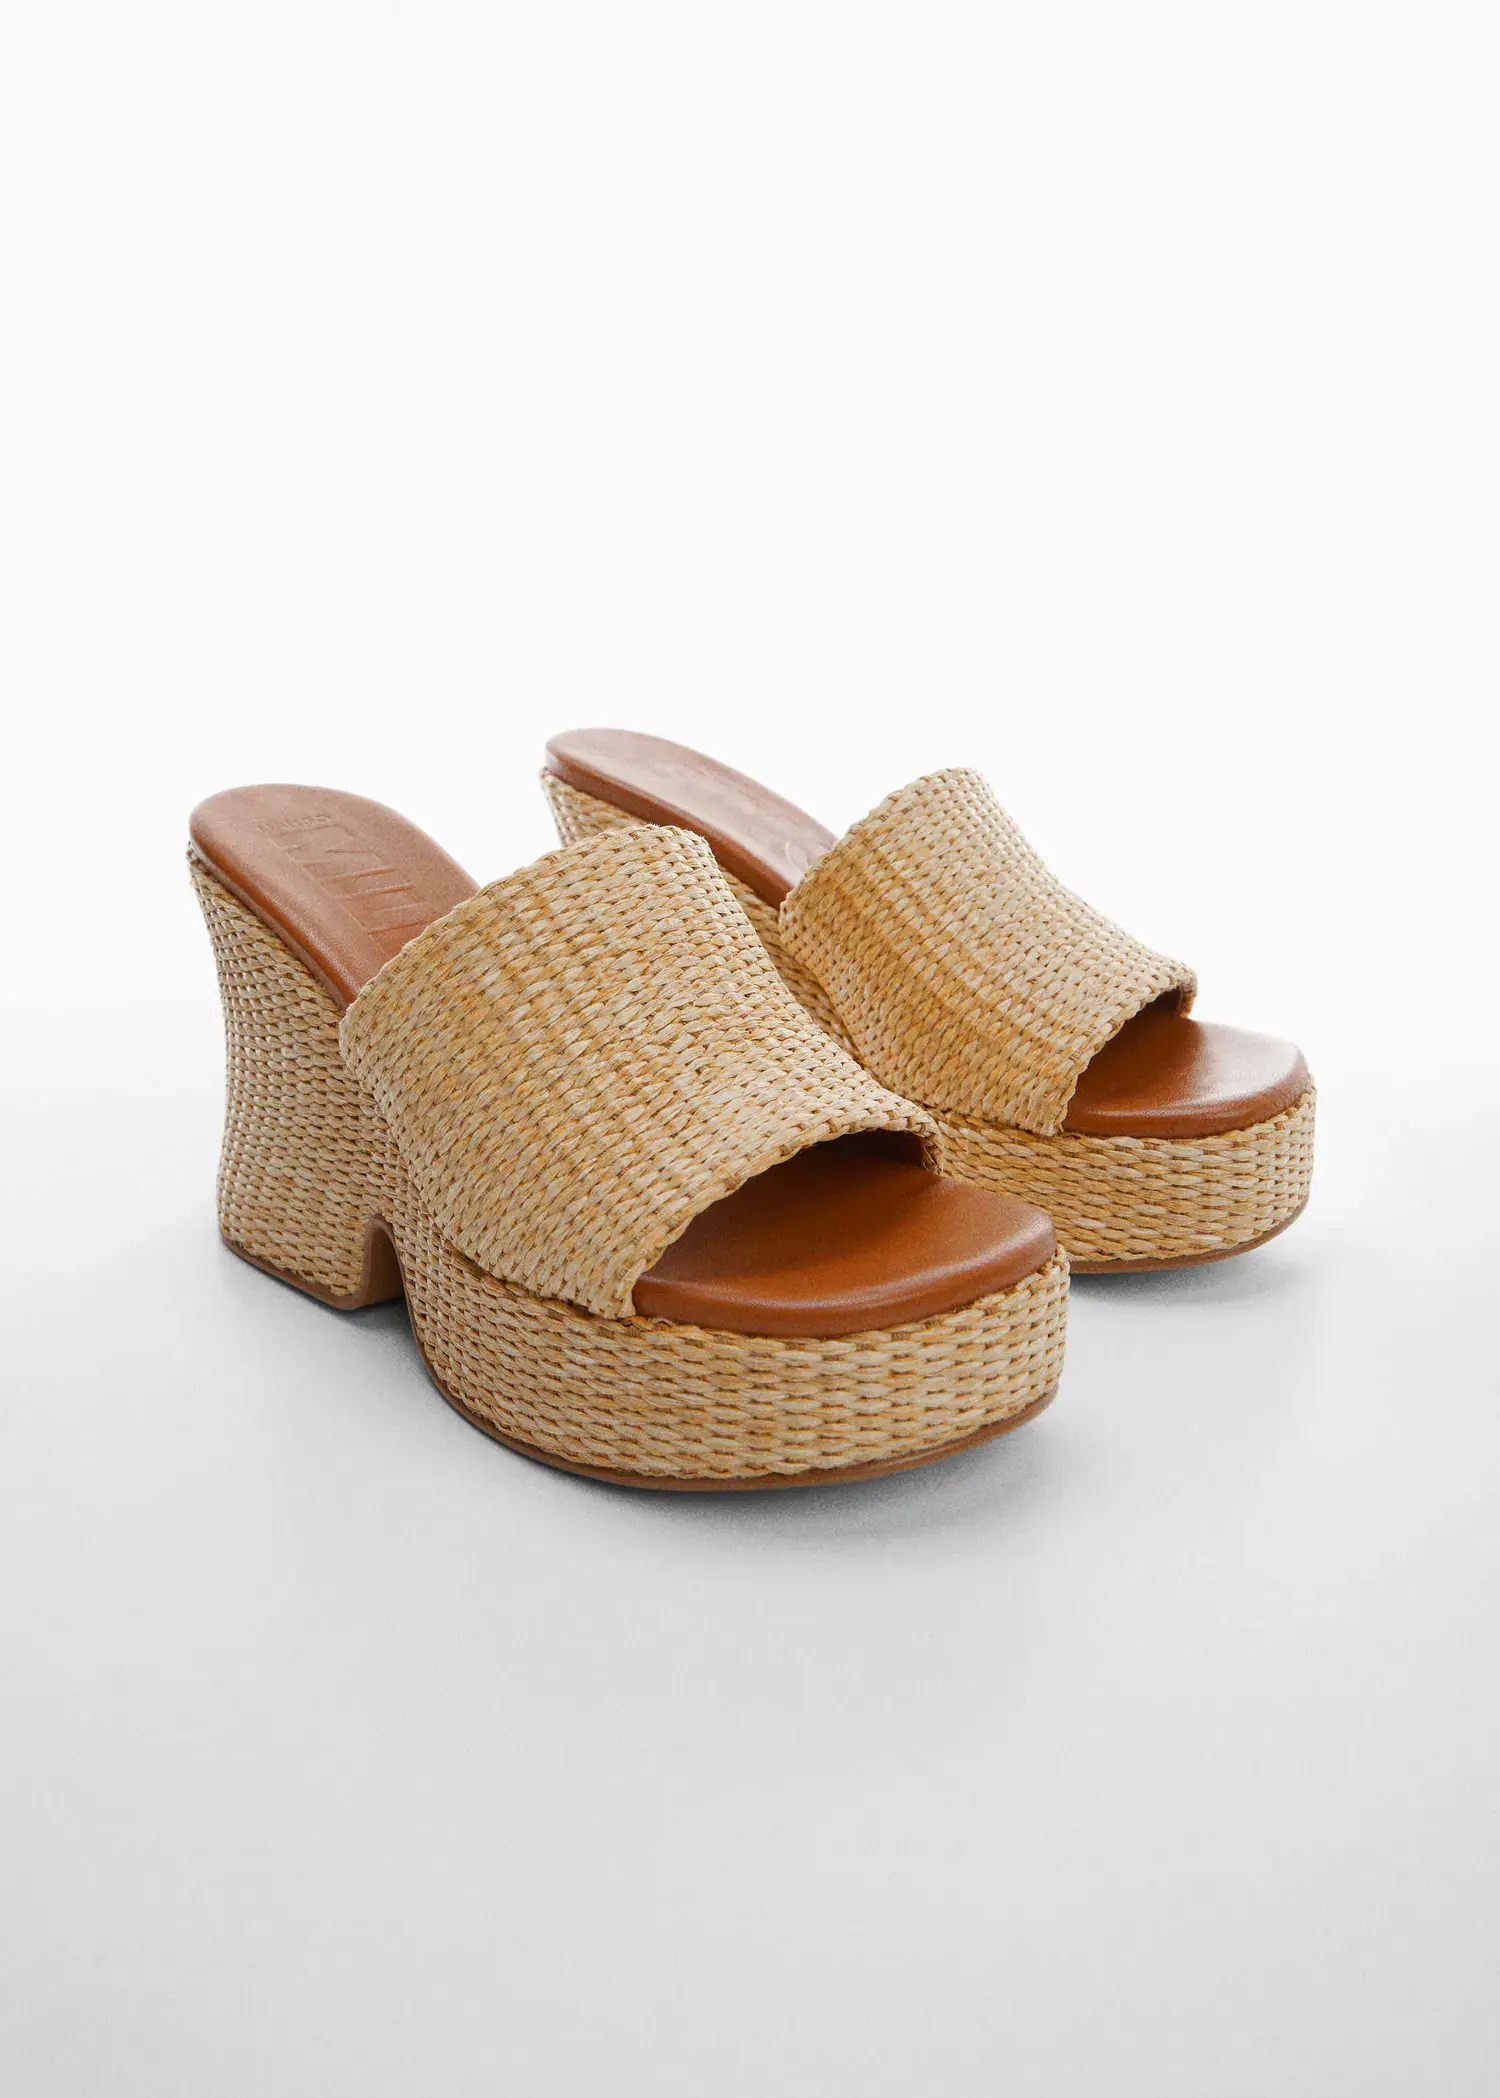 Mango Natural fibre wedge sandals. a close up of a pair of shoes on a white surface 